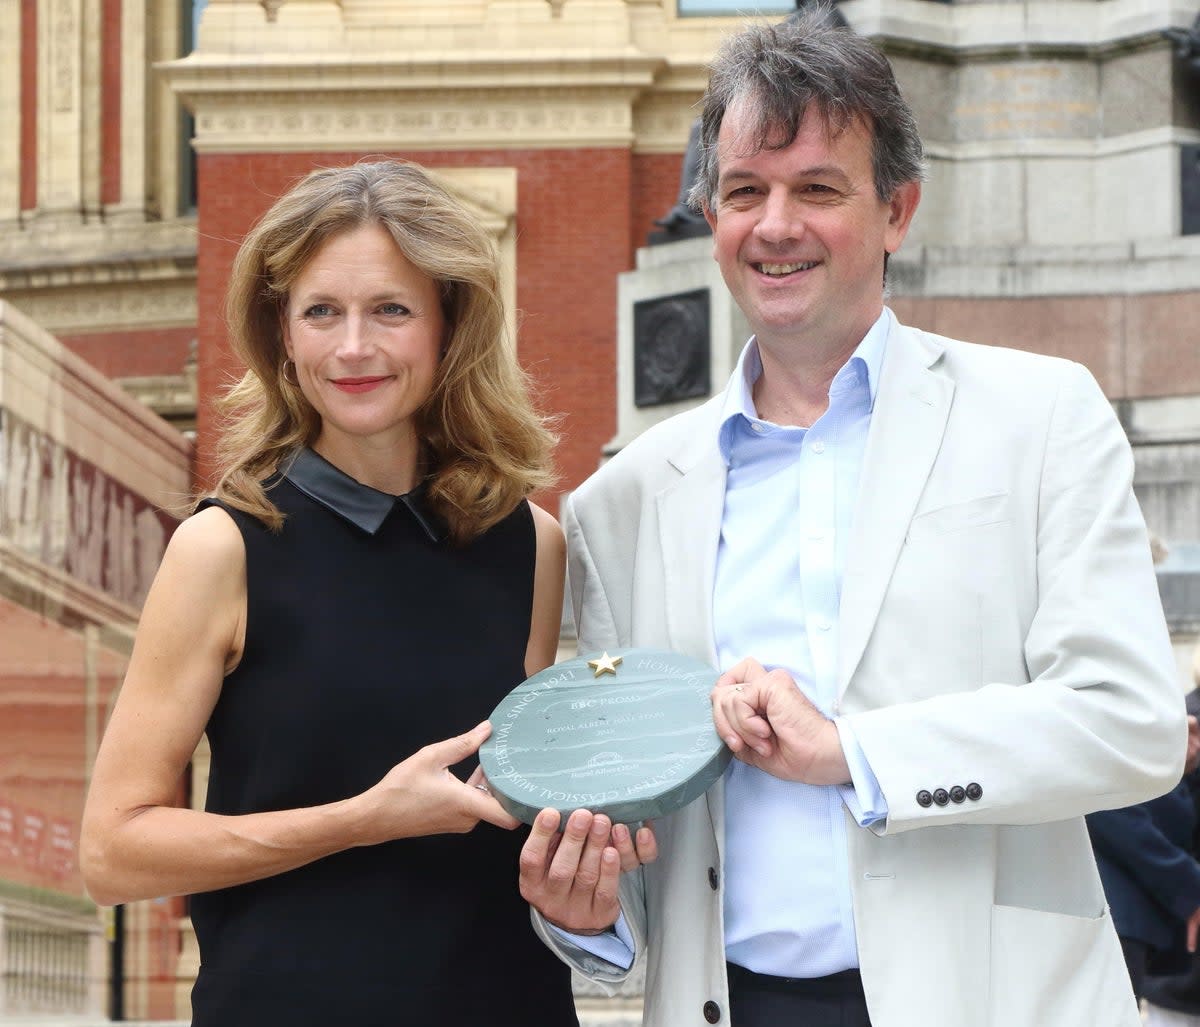 Newscaster Katie Derham and David Pickard  at the Royal Albert Hall 'Walk Of Fame' launch, 2018 (Alamy Stock Photo)